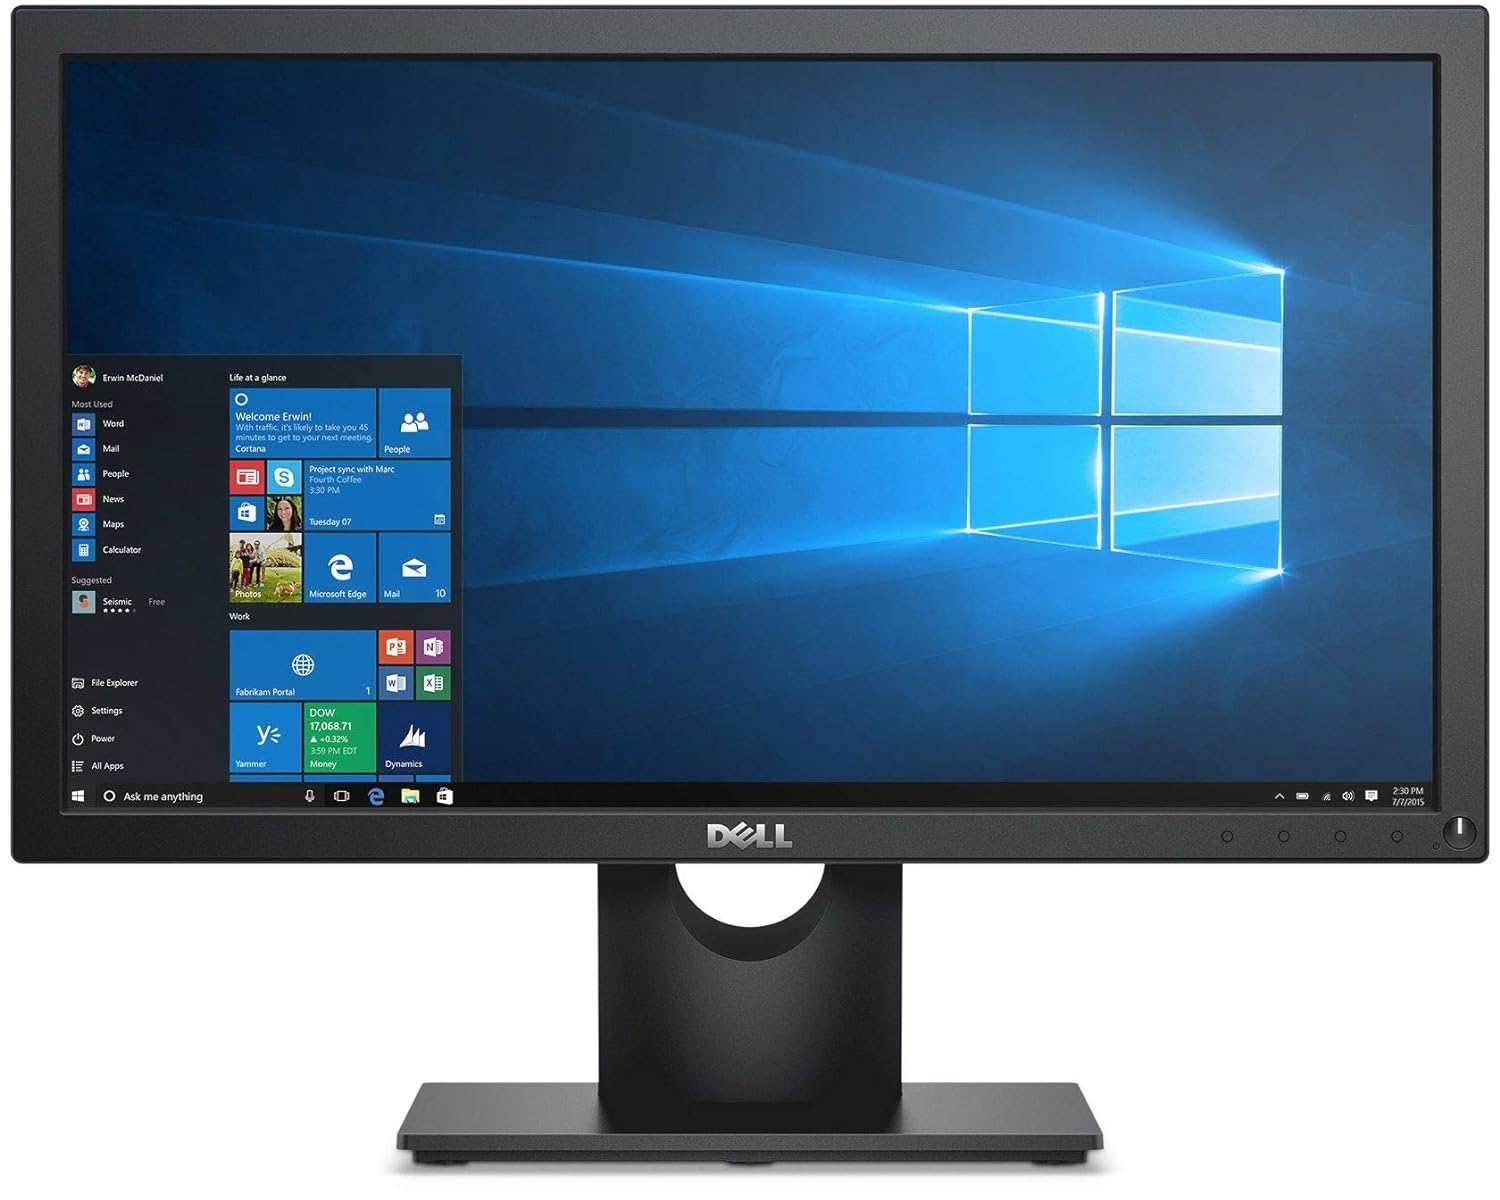 Dell monitor with a black screen